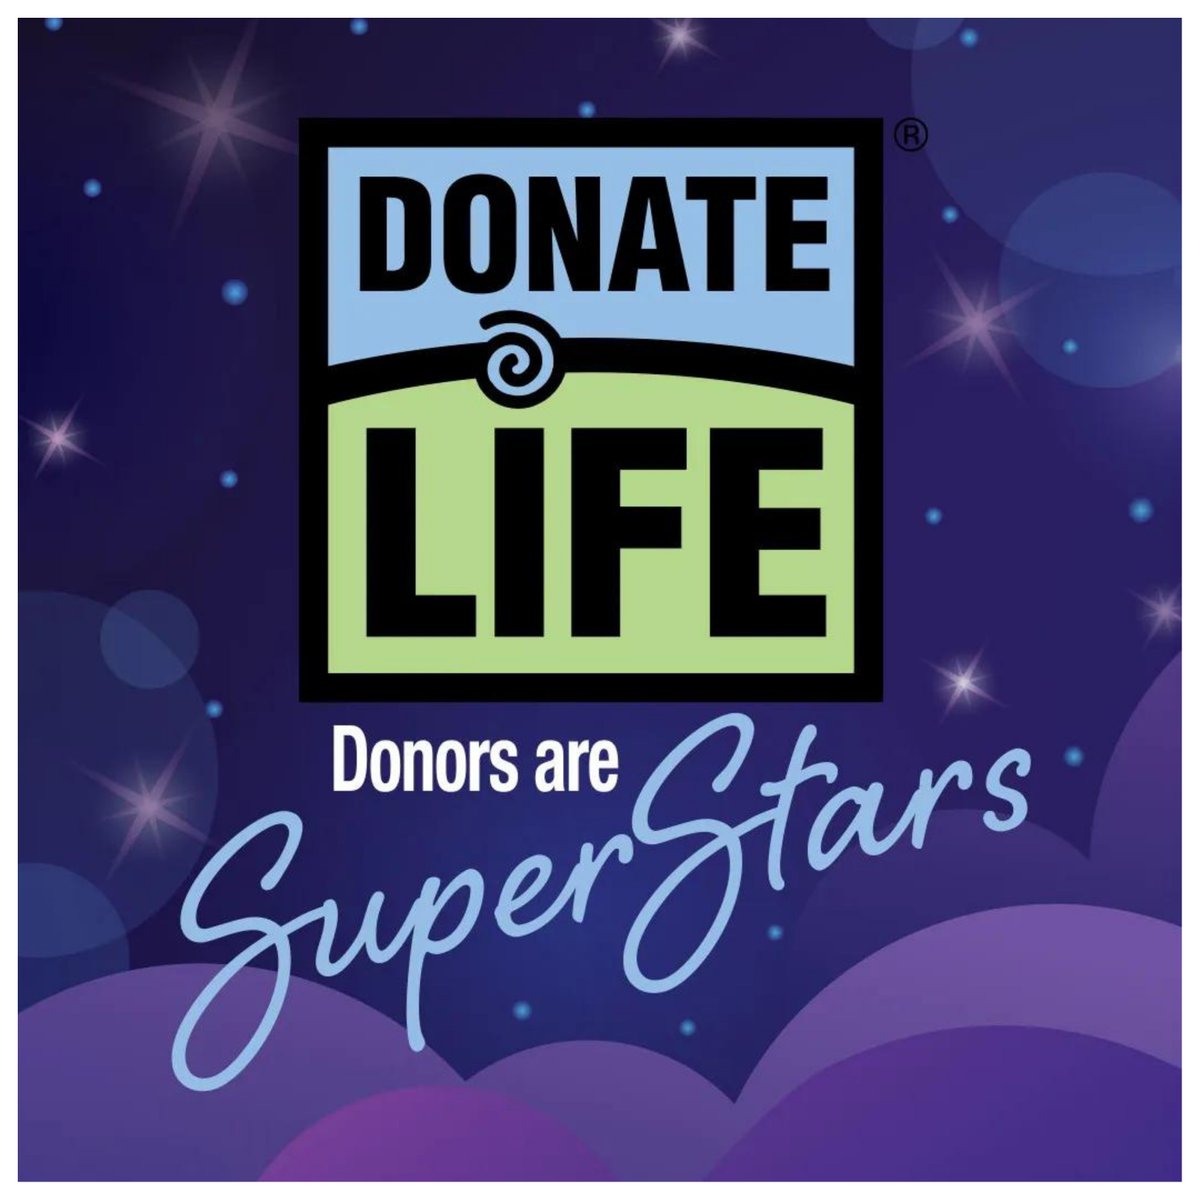 April is Donate Life Month, a time to come together to celebrate the incredible impact of the gift of life through transplantation. Learn why and how we celebrate Donate Life Month here: helphopelive.org/april-is-donat… @DonateLife